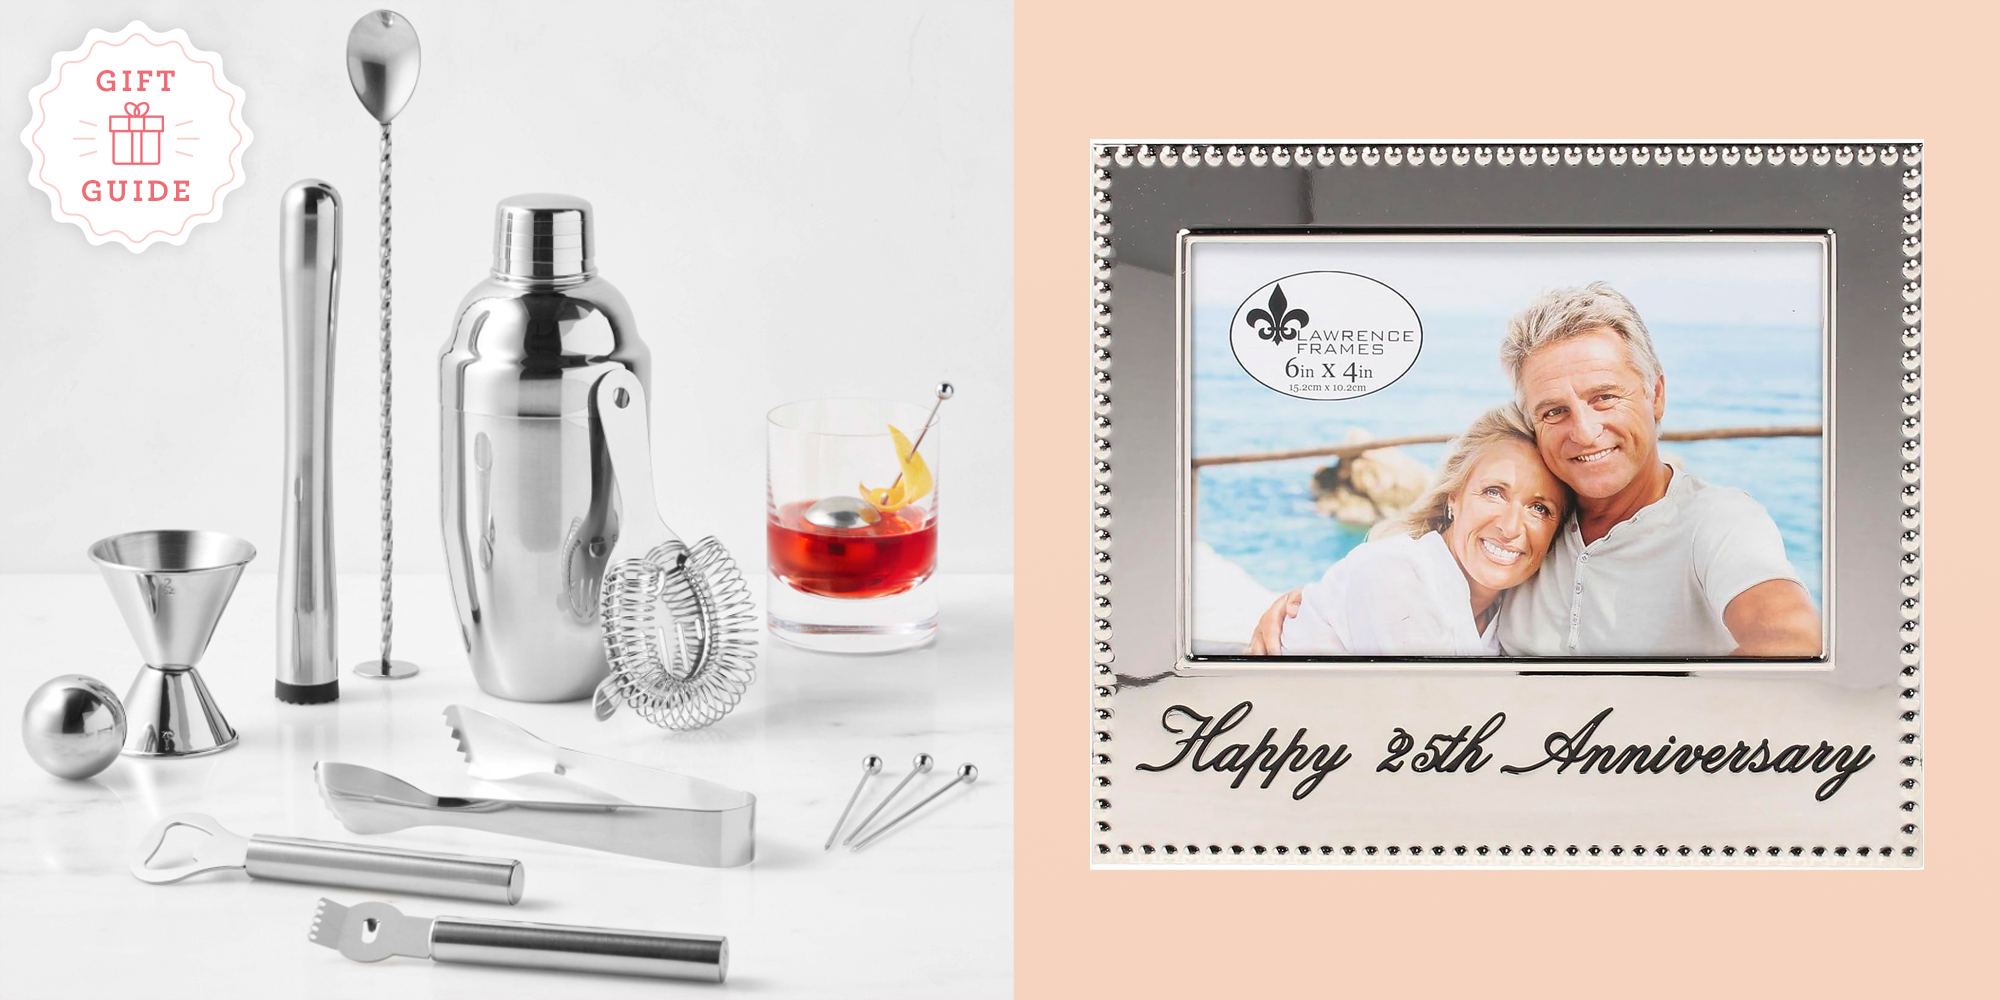 25th Anniversary Gifts: Best Ideas (Traditional & Modern) » All Gifts  Considered